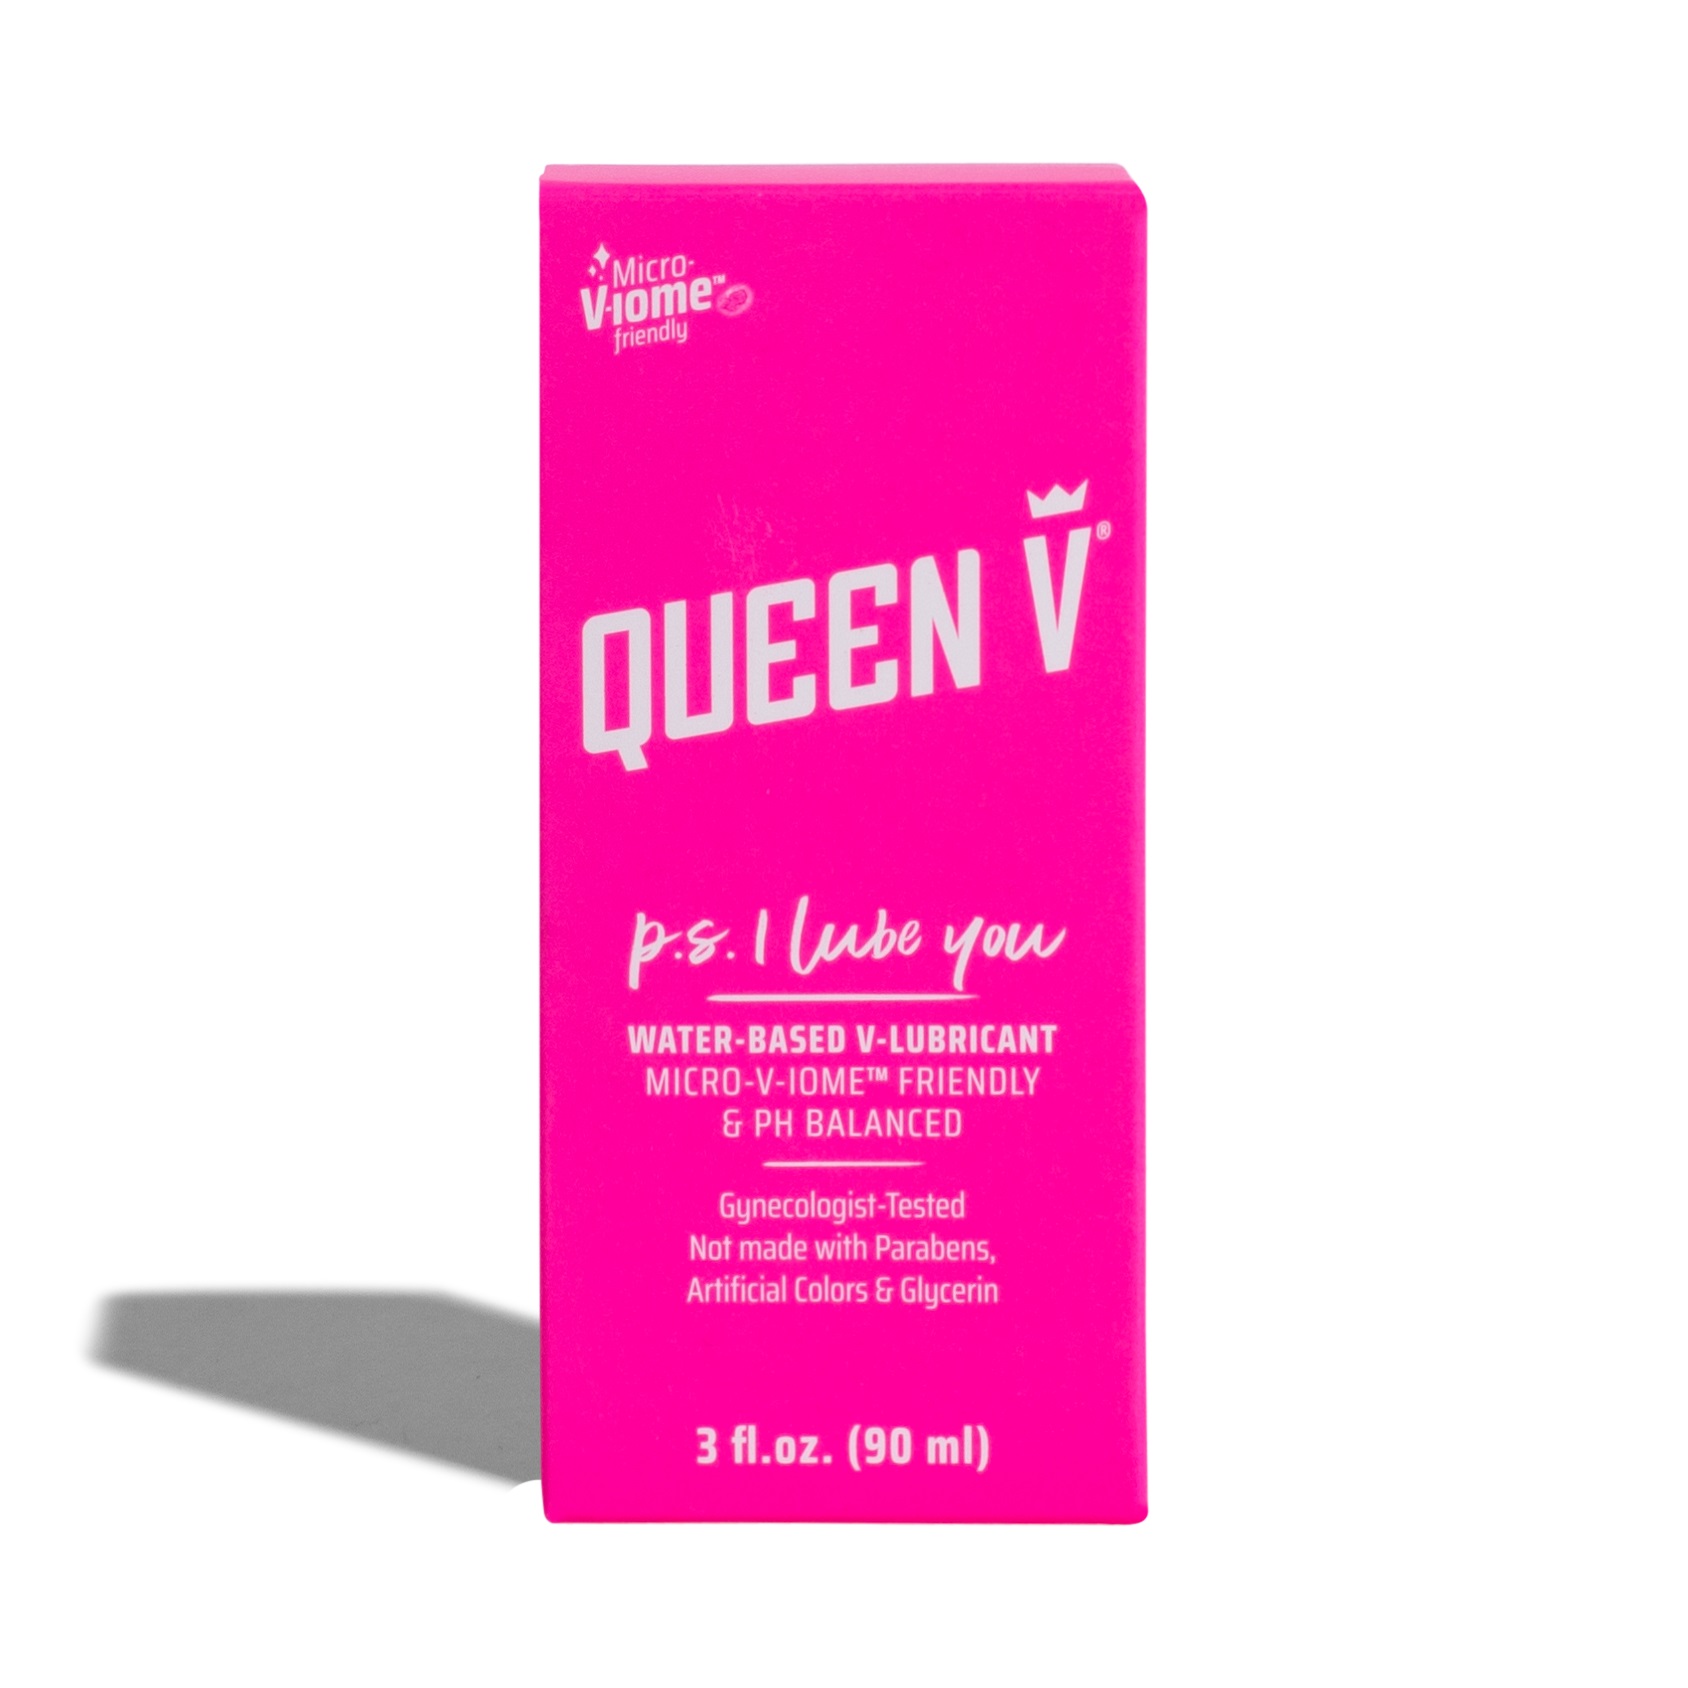 QUEEN V® p.s. I Lube You - Intimate Lube